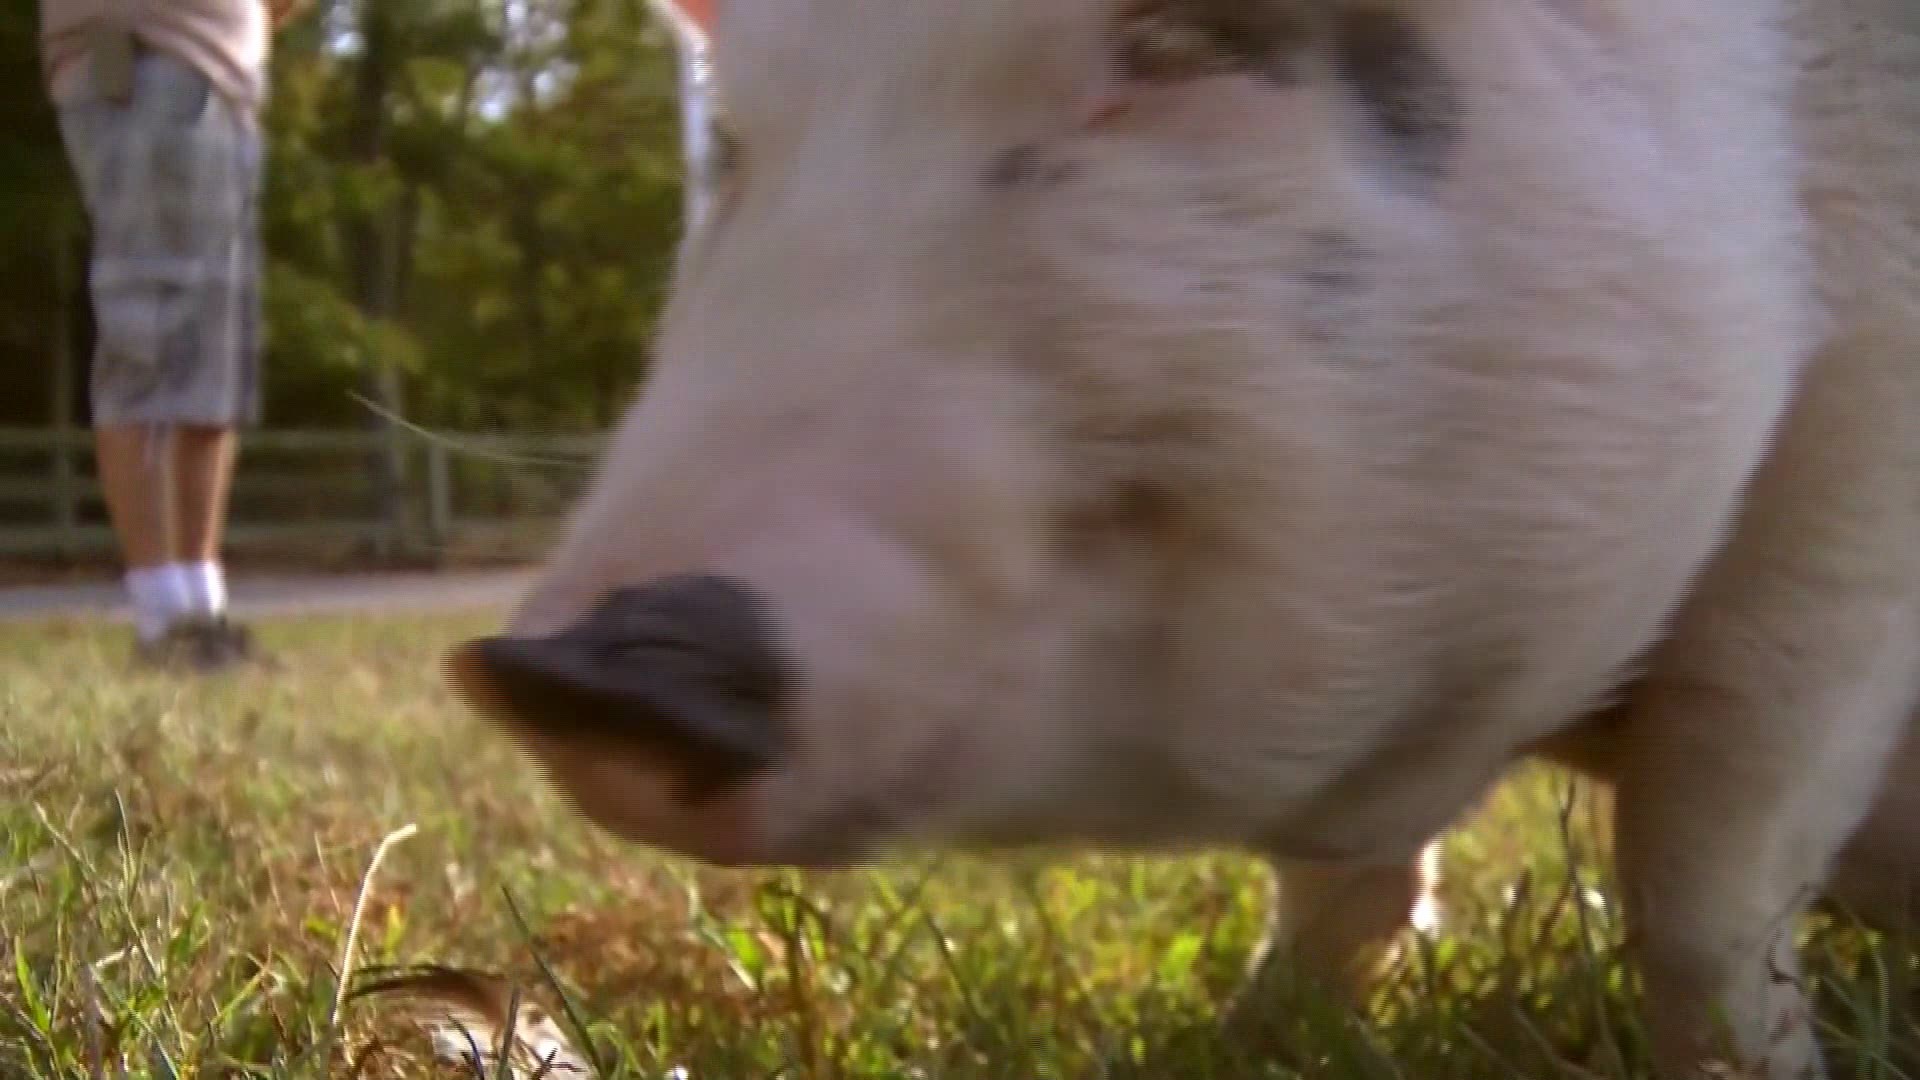 Blind Spot Animal Sanctuary in Rougemont, NC says they're at capacity and can no longer take in new pigs. Other shelters say they've had a pig uptick as well.